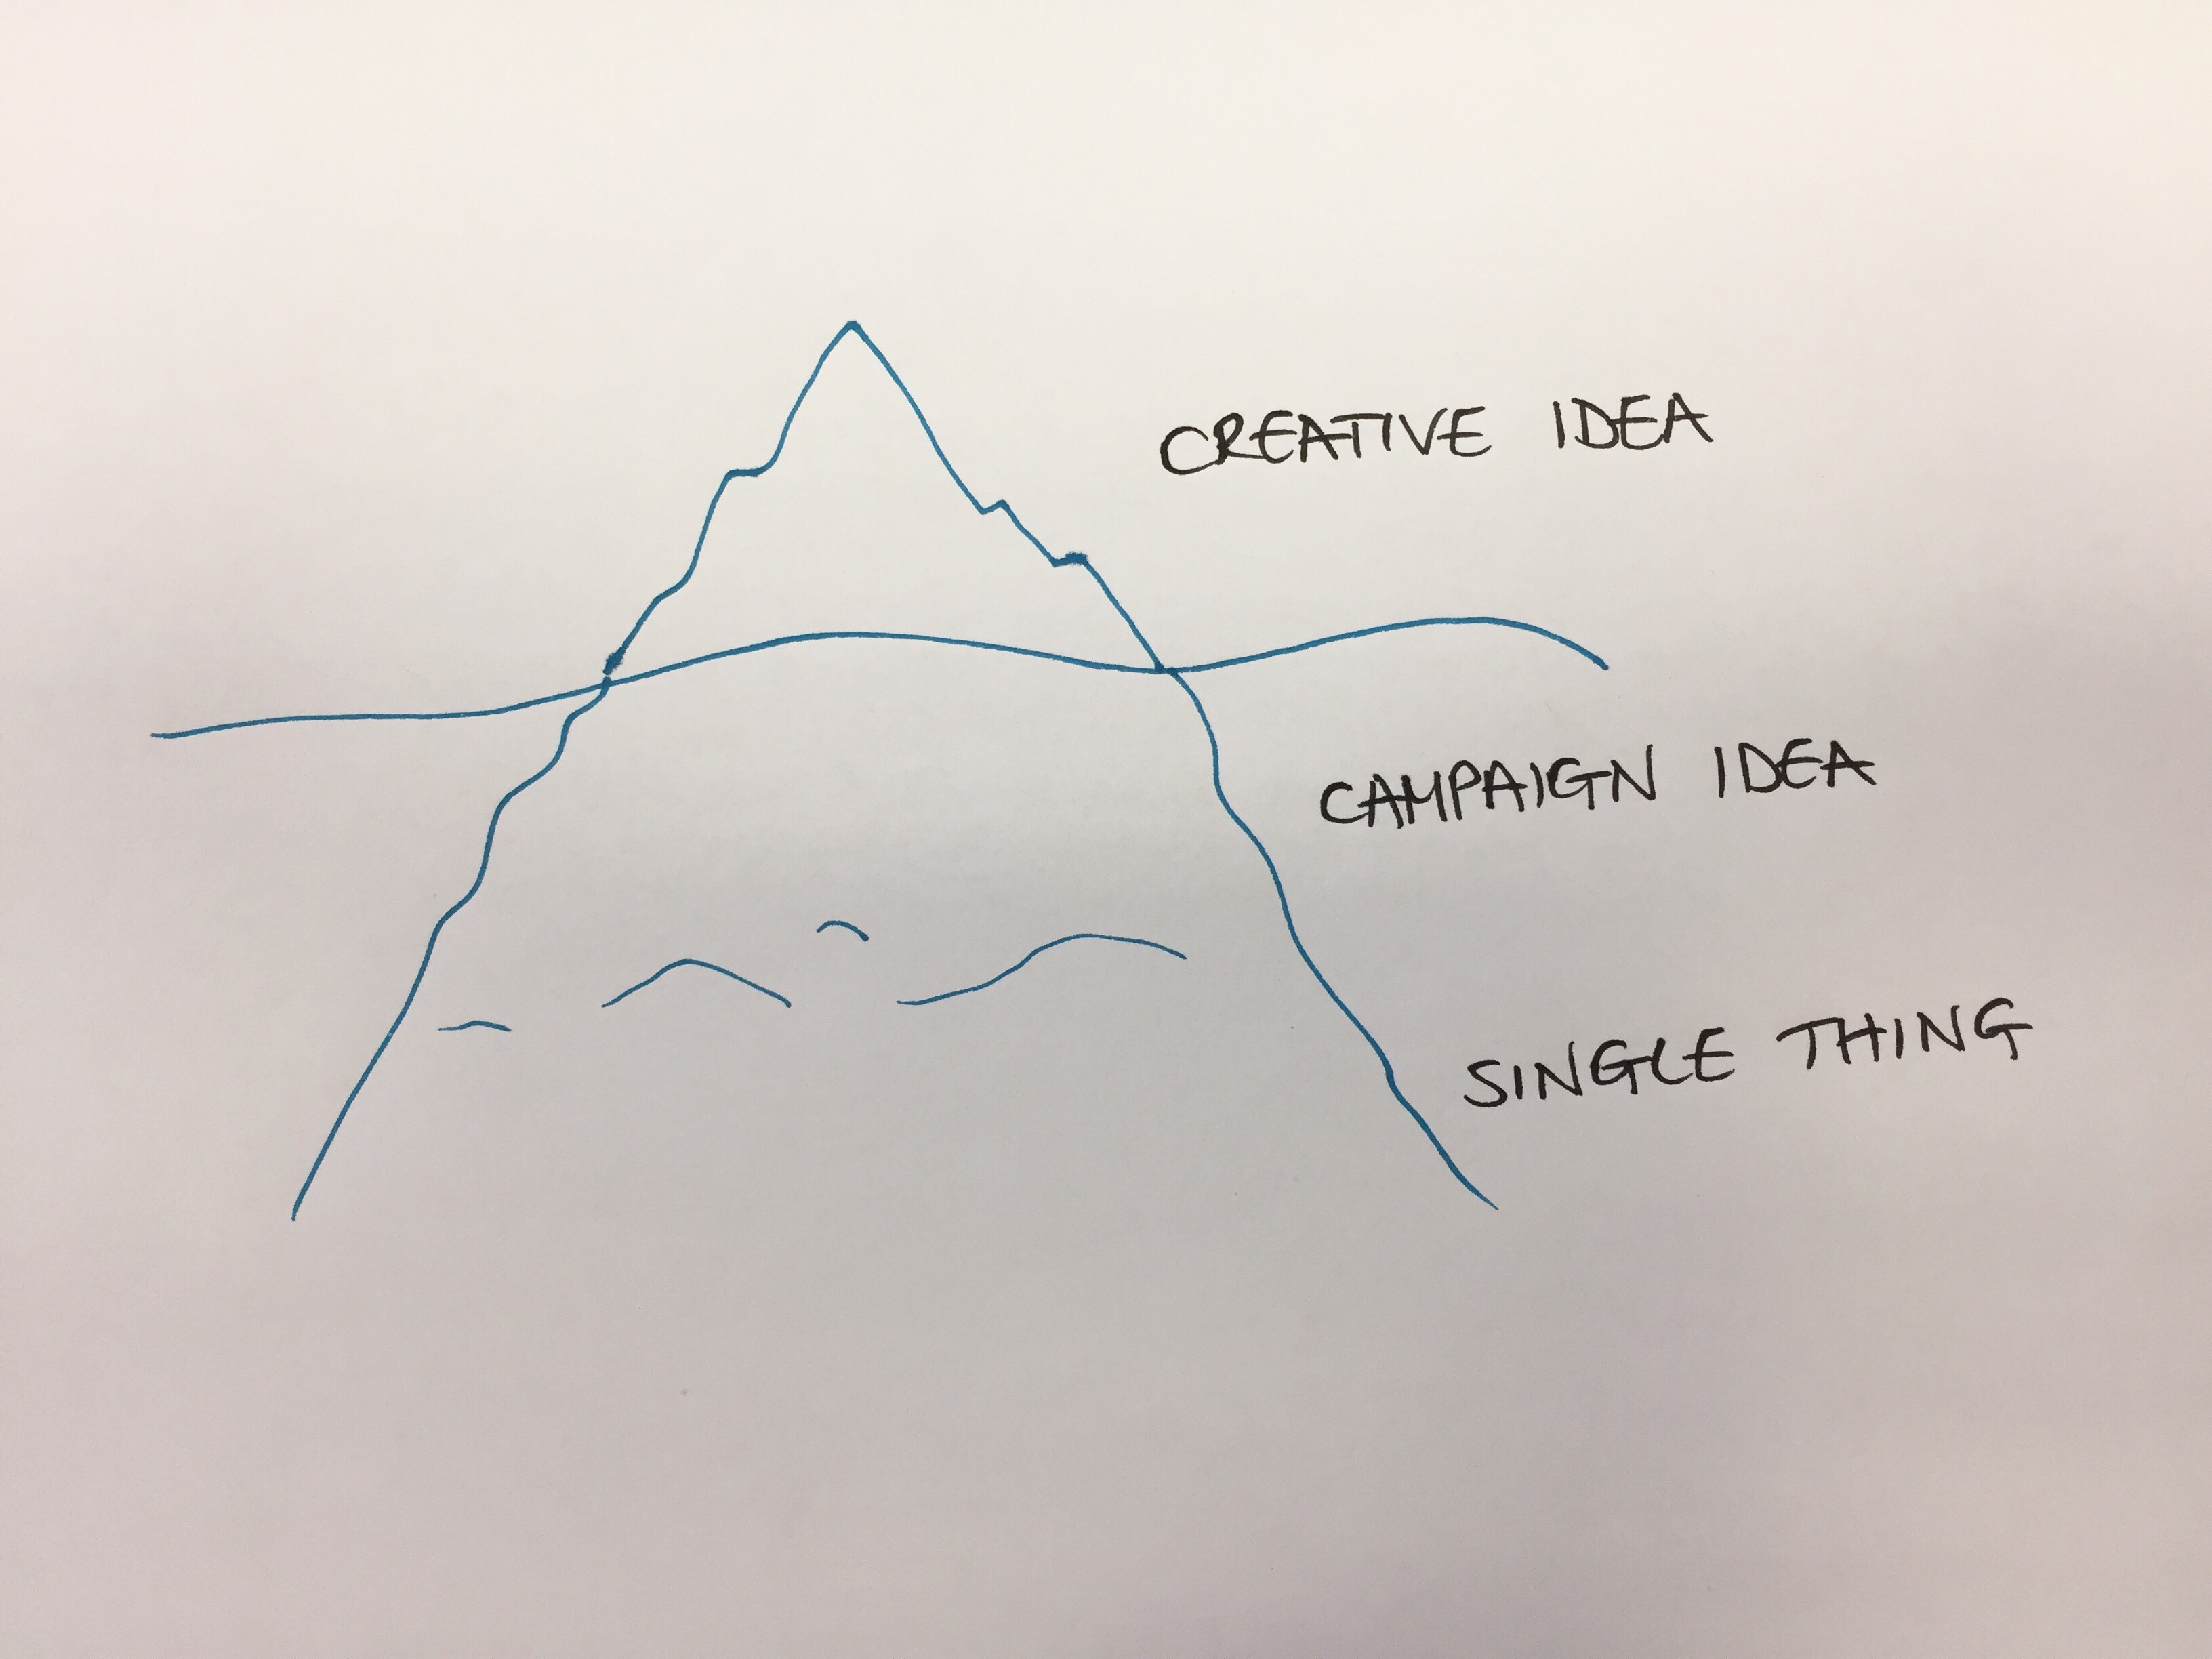 The Heirarchy of Ideas